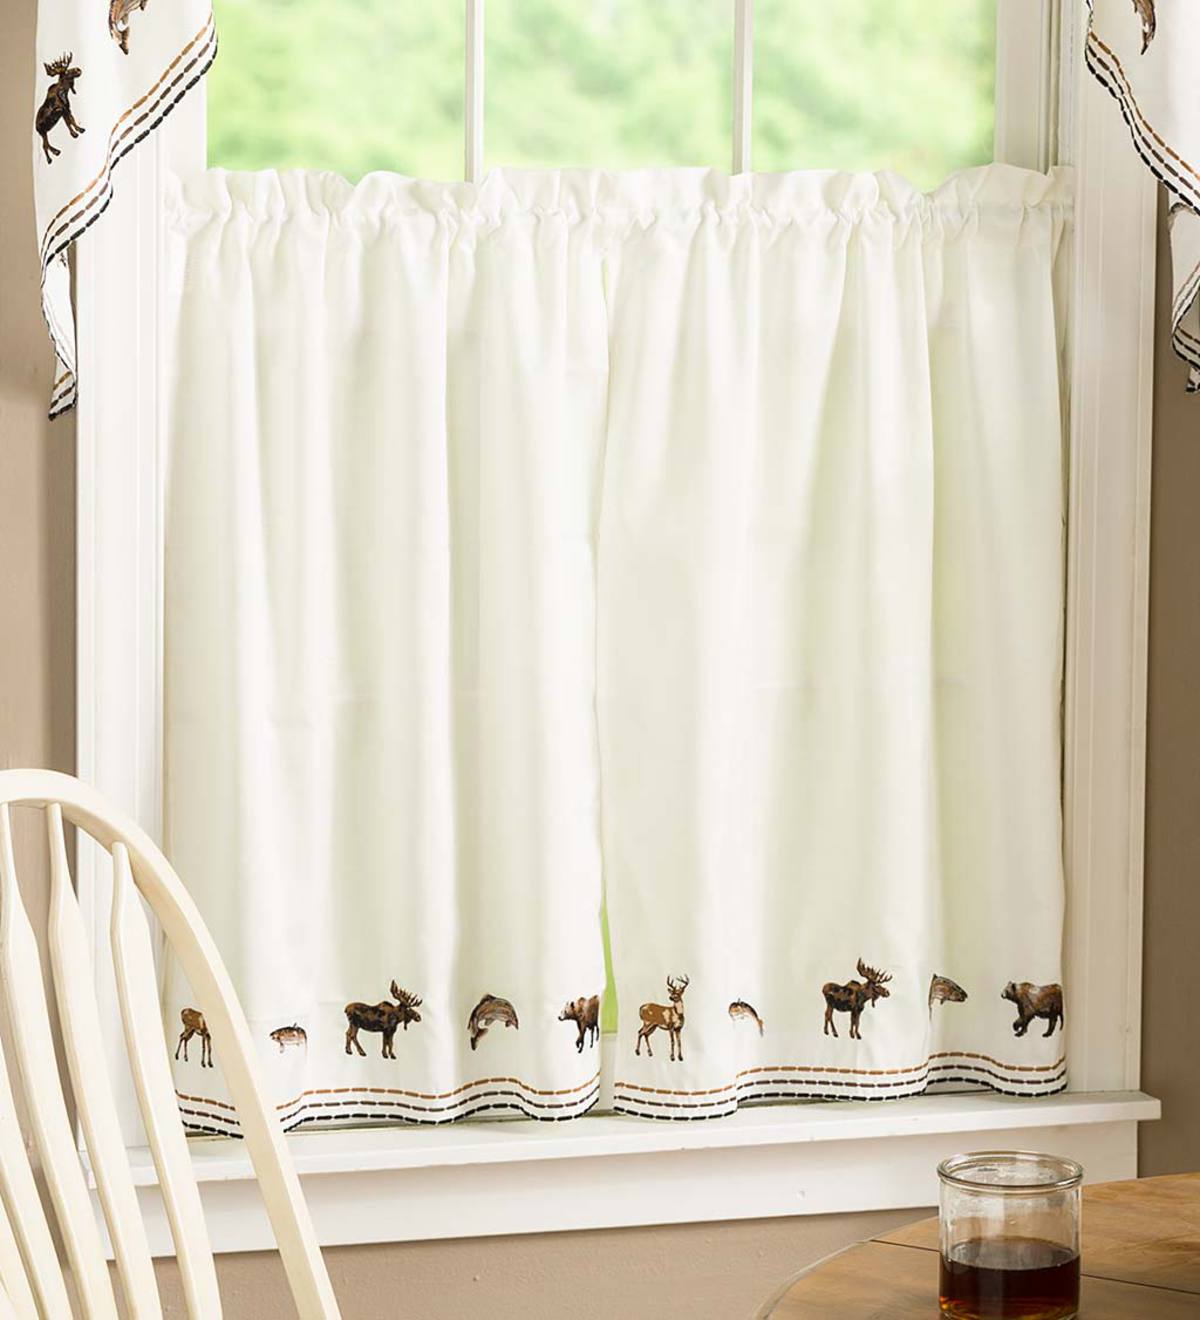 Lodge Embroidered Cafe Curtains, Tier Pair 56"W x 36"L